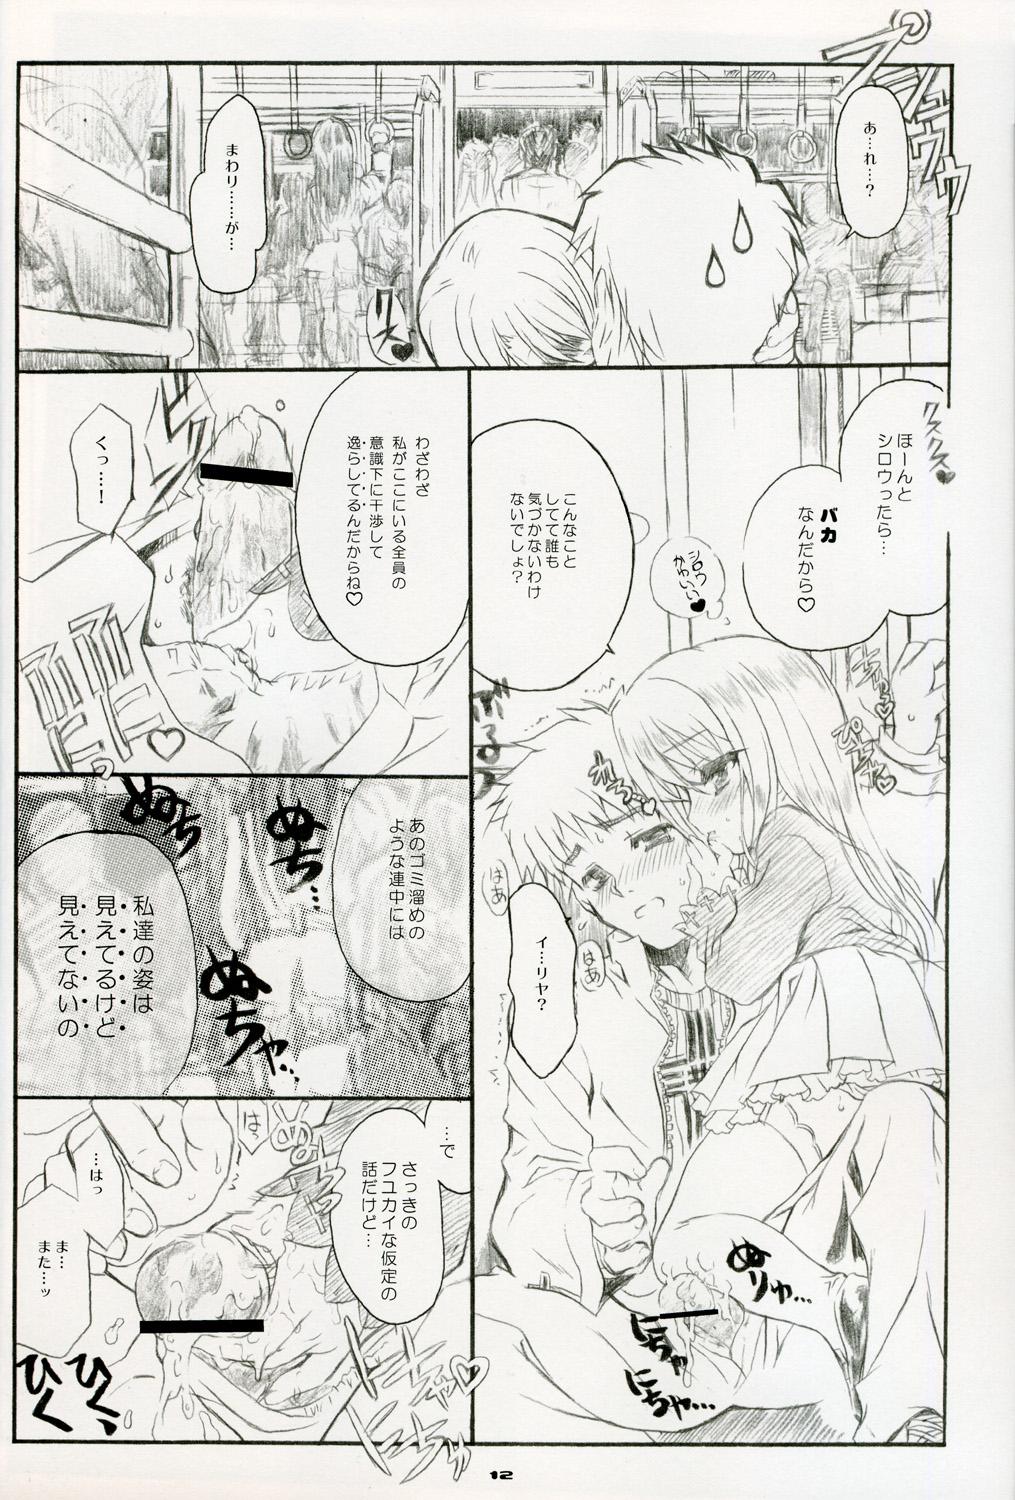 First Time Illya Train Shopping - Fate stay night Gilf - Page 12